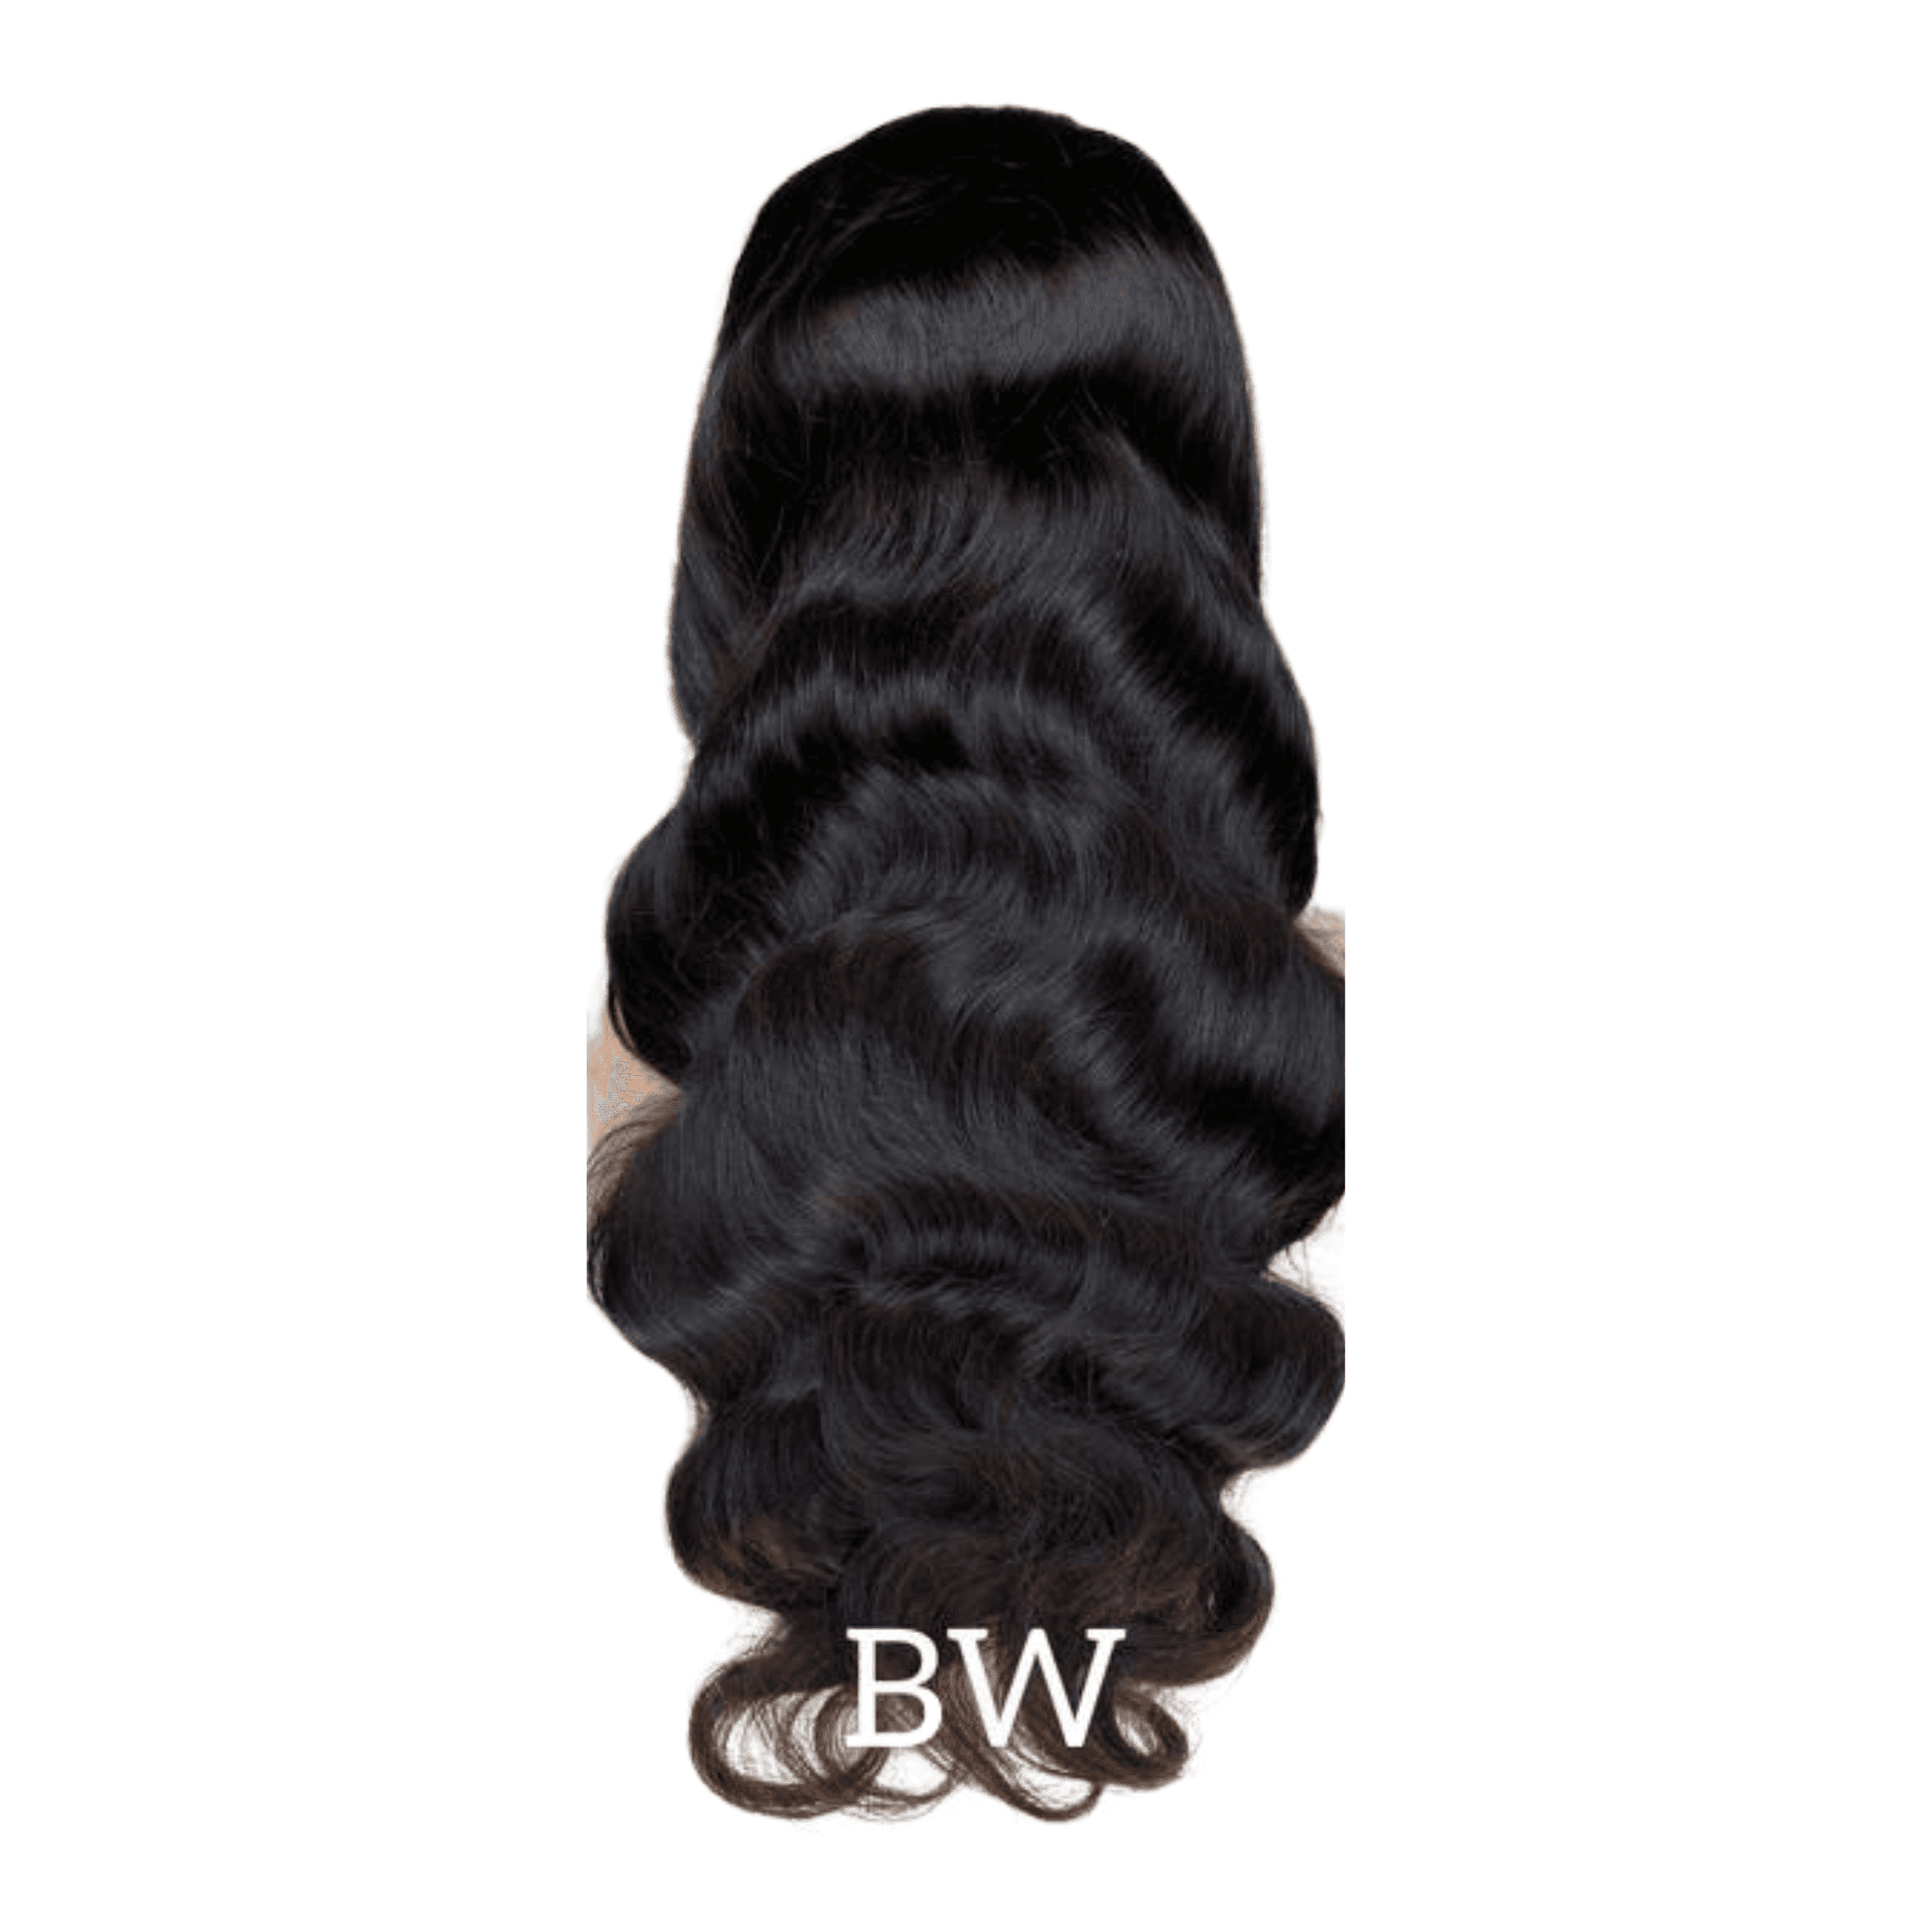 CAPD•HD Lace Wig 13X4 Full Frontal Body Wave - CAPD INSPIRED HAIR INC.